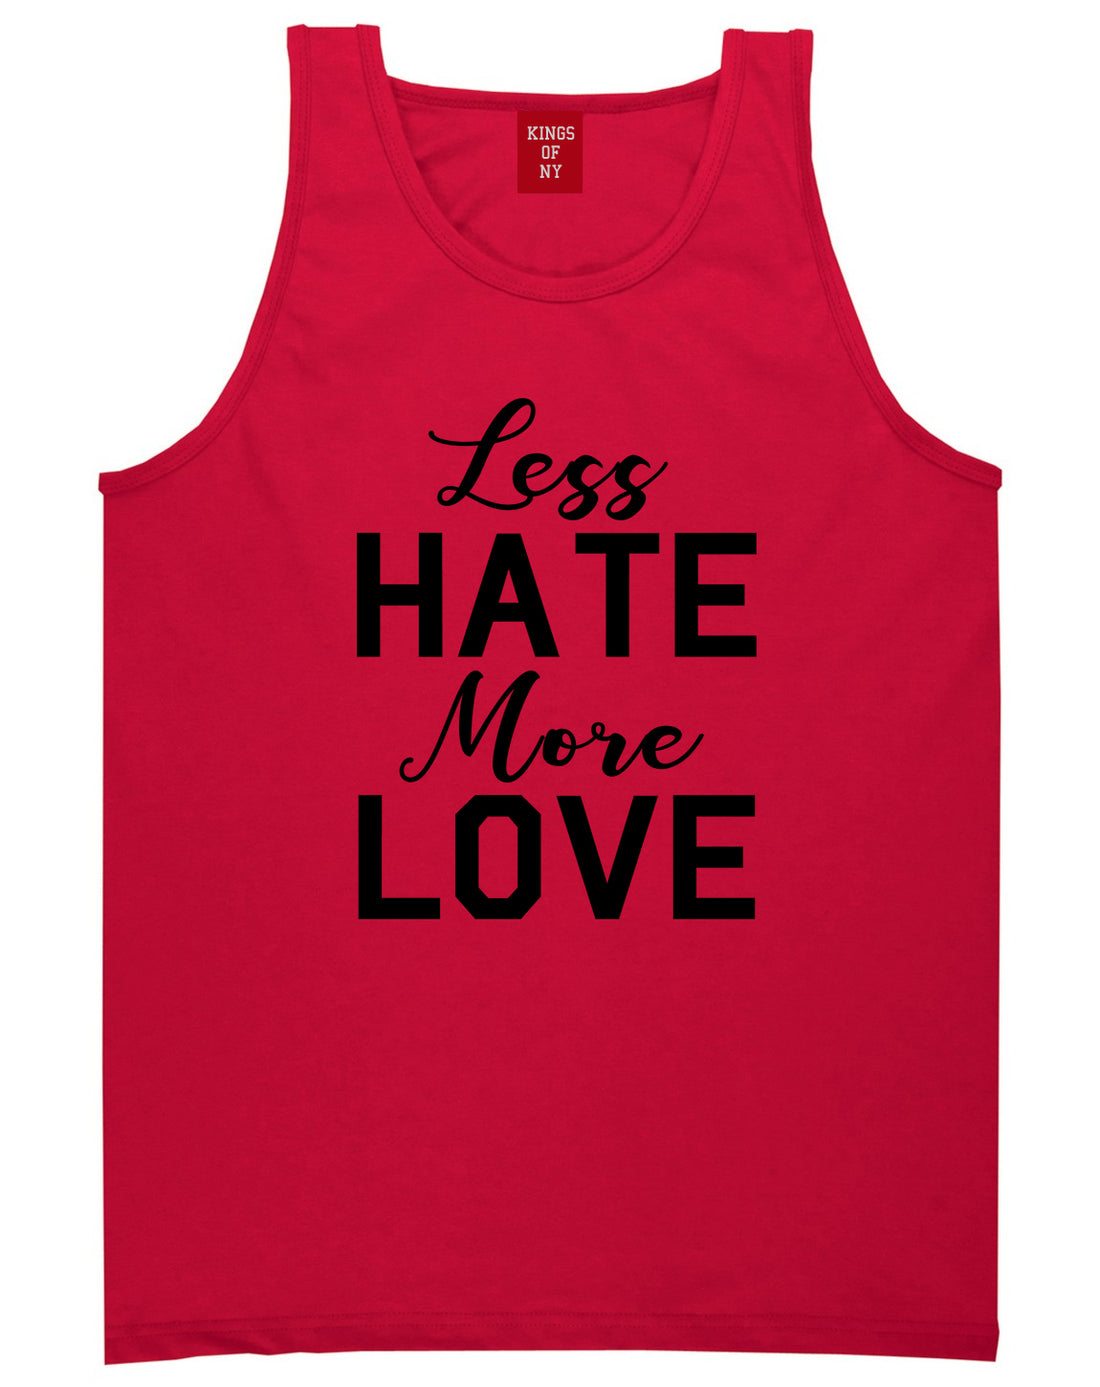 Less Hate More Love Mens Tank Top Shirt Red by Kings Of NY